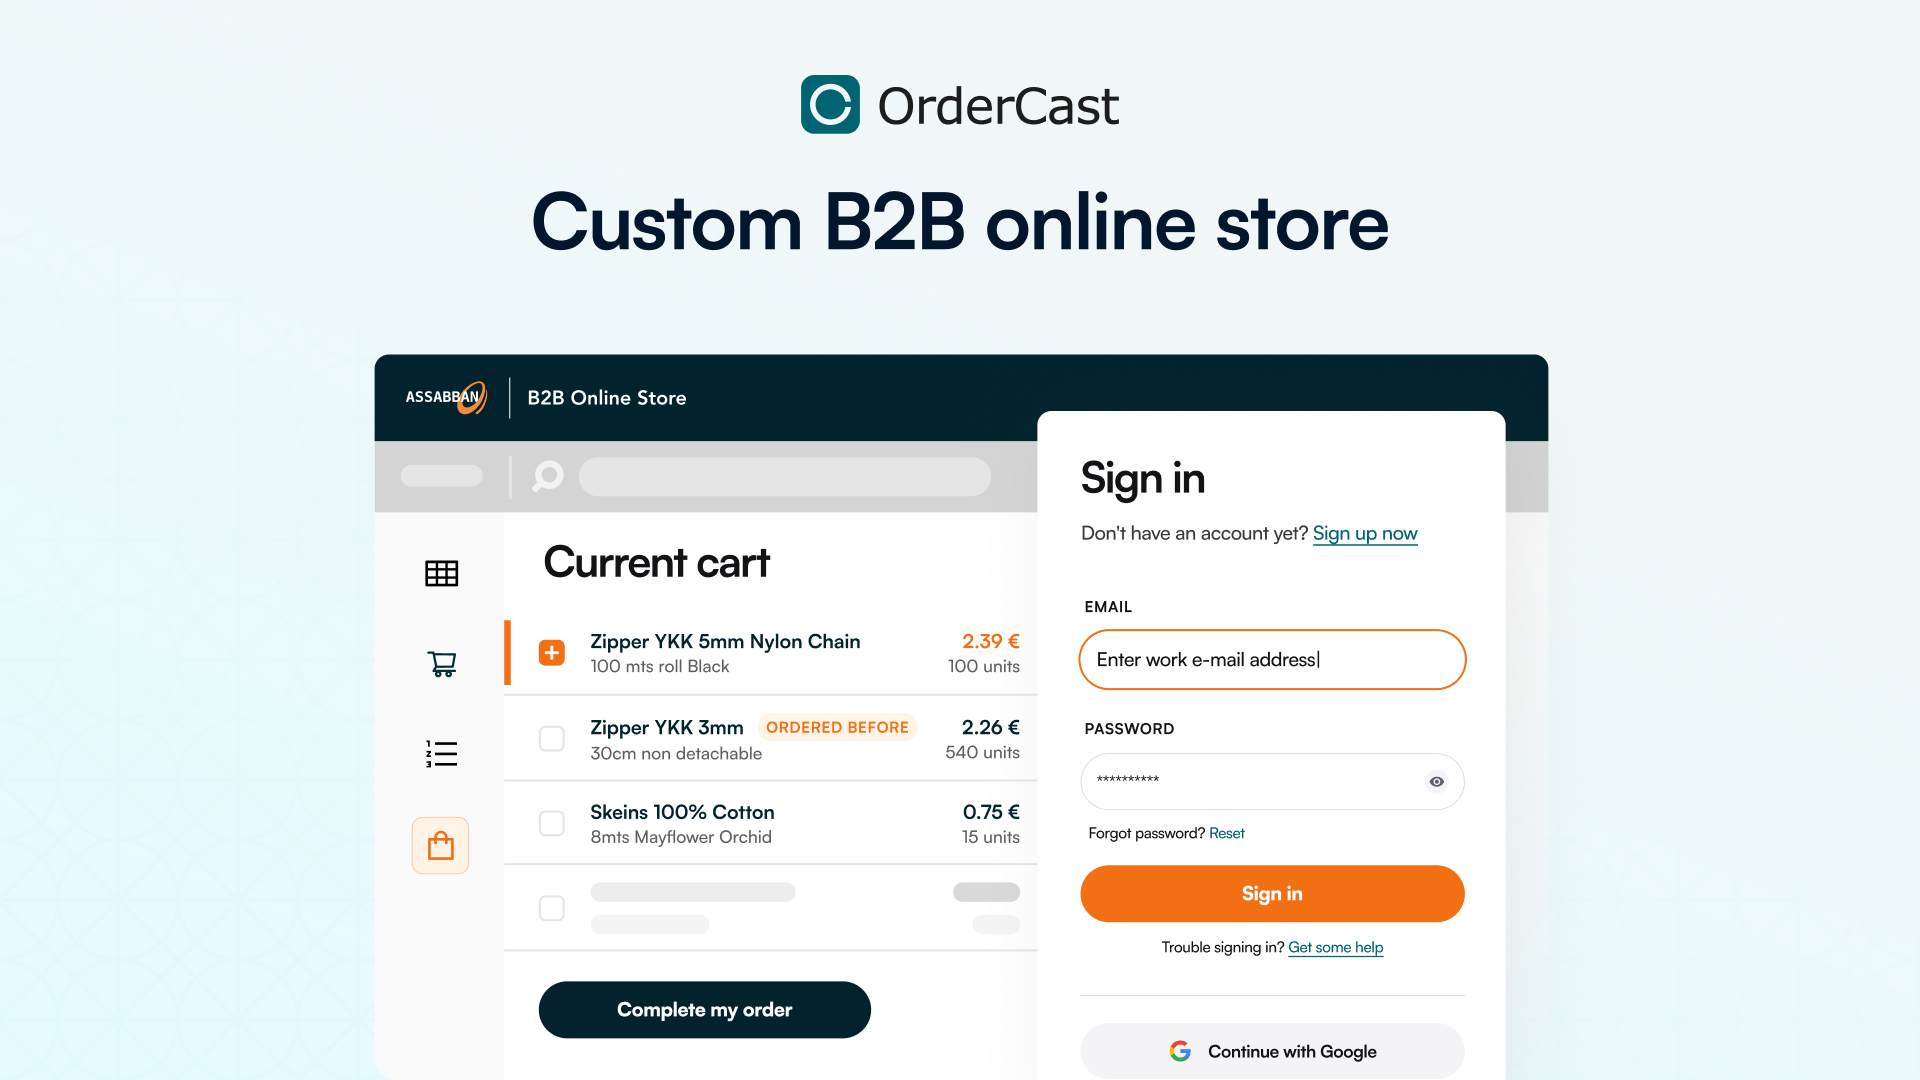 Customer B2B Online Store by OrderCast